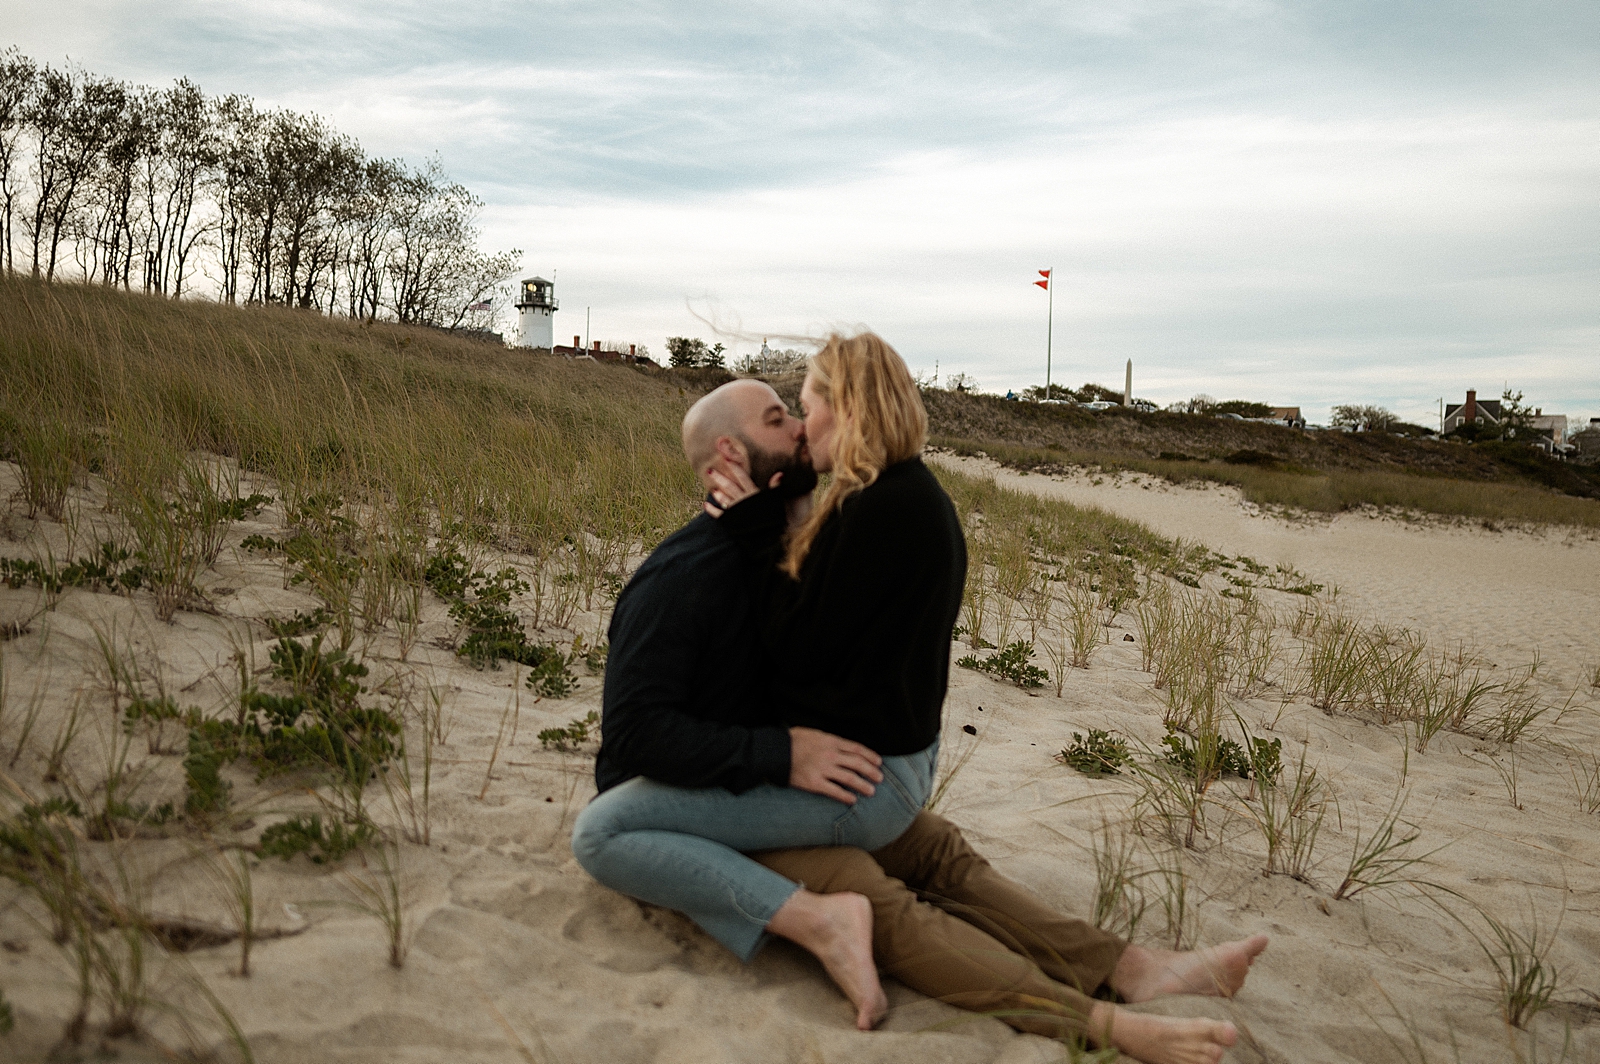 Woman straddling man on the beach and kissing on the sand